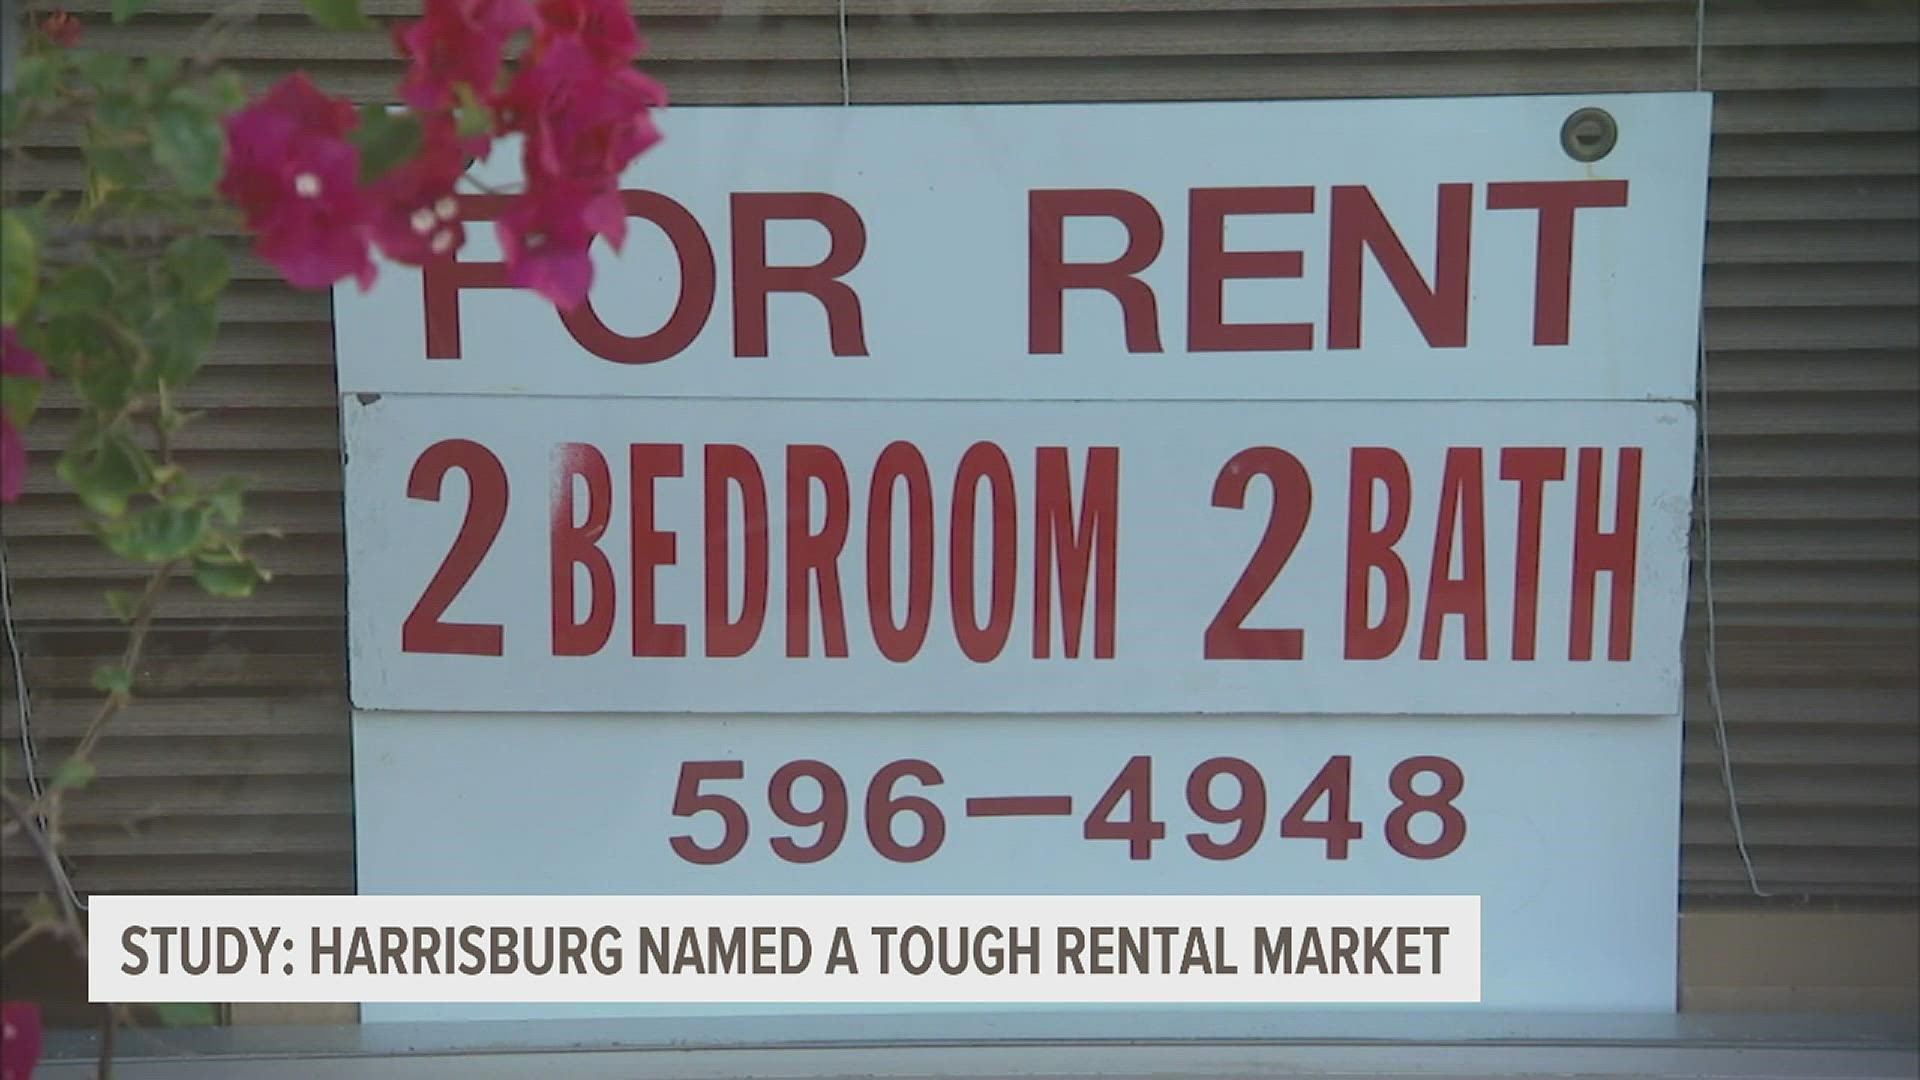 Harrisburg sits at the #2 most competitive rental market, just behind Miami-Dade County